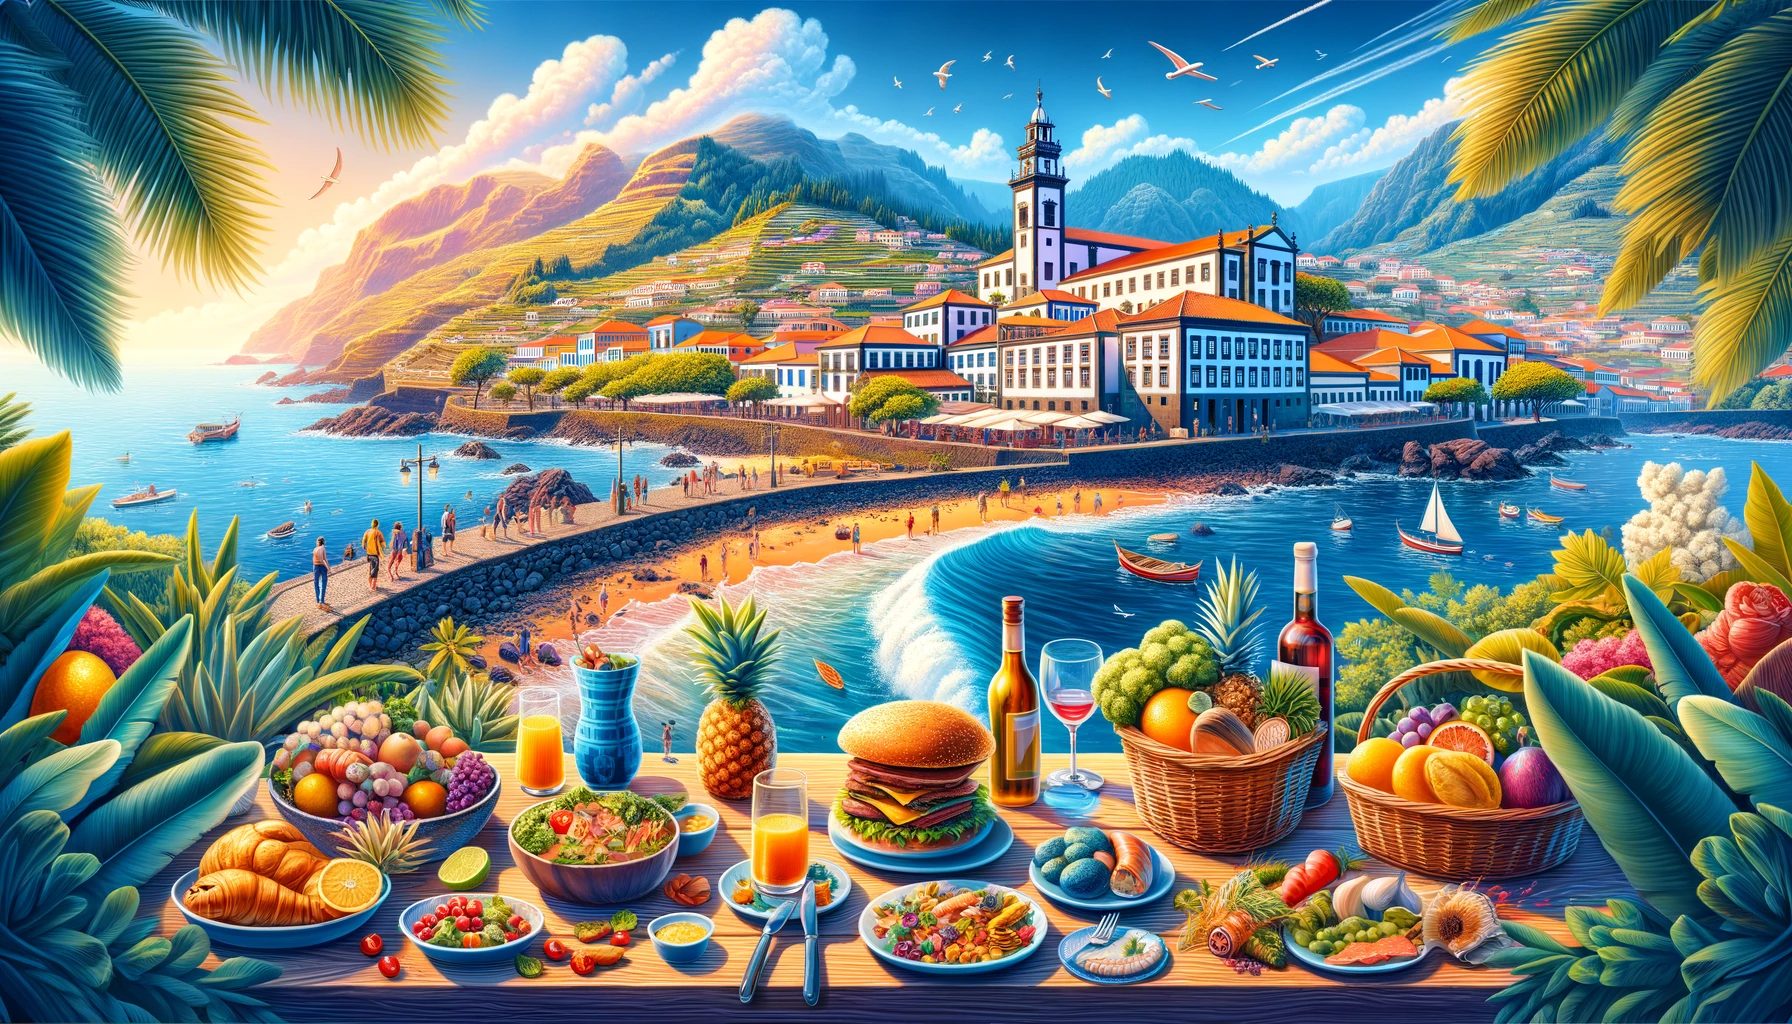 Colorful seaside landscape with food and architecture.